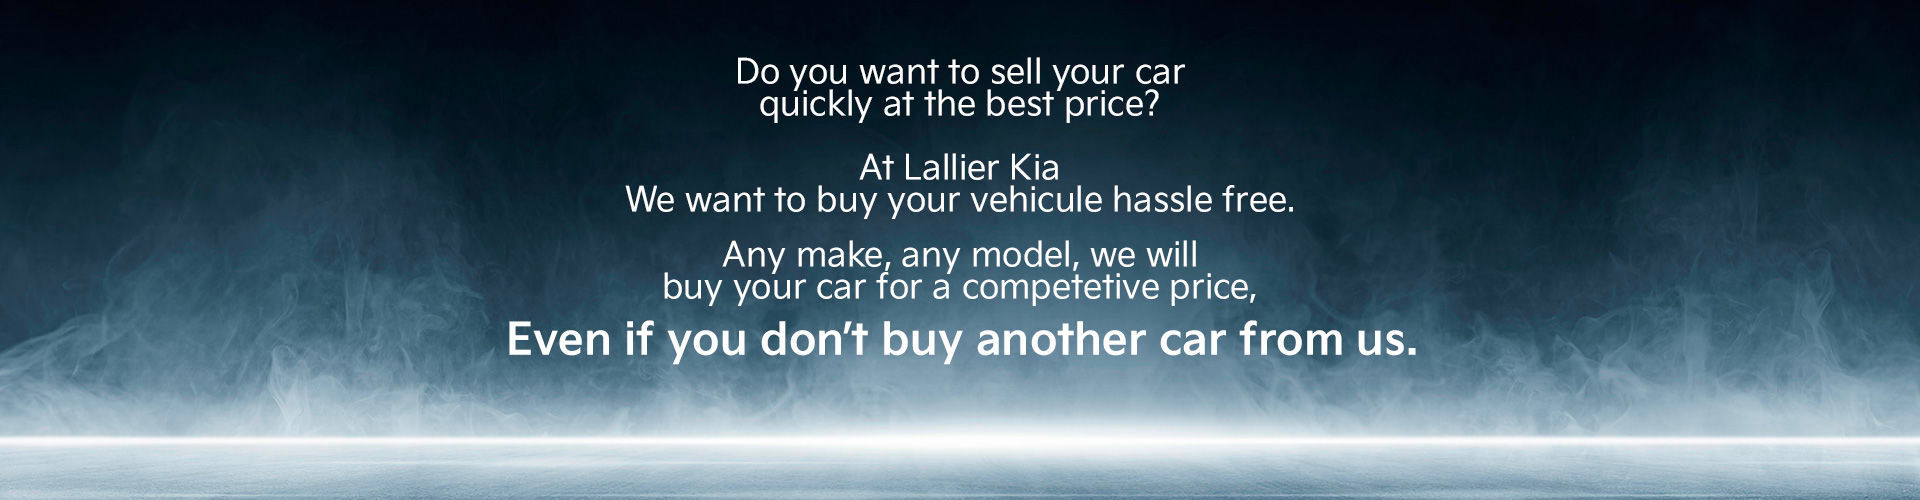 Sell your car